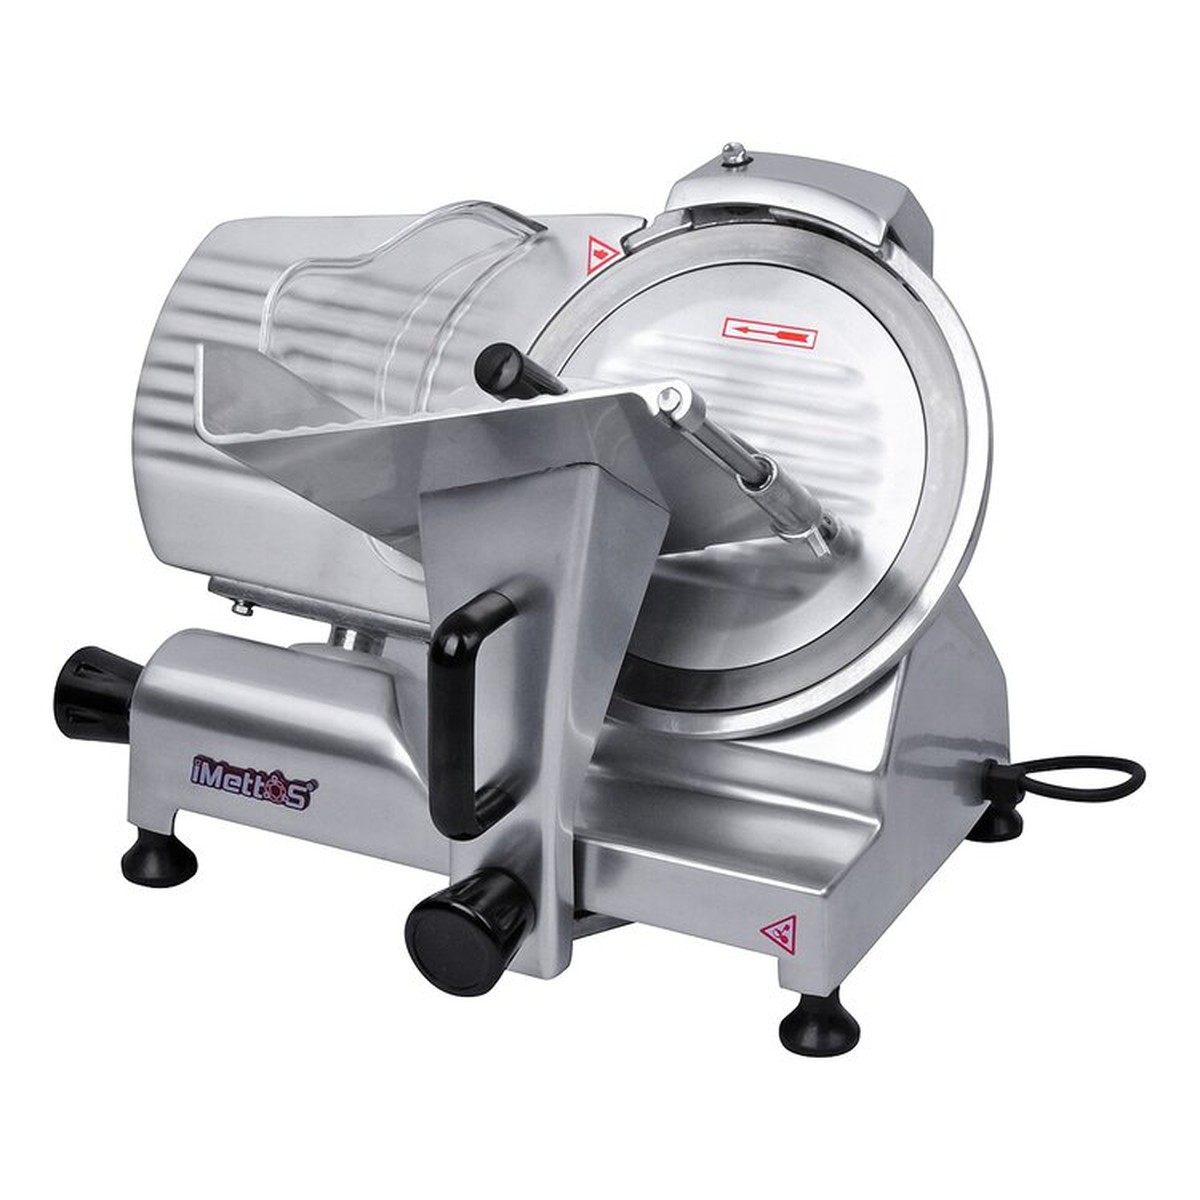 small meat slicer for sale